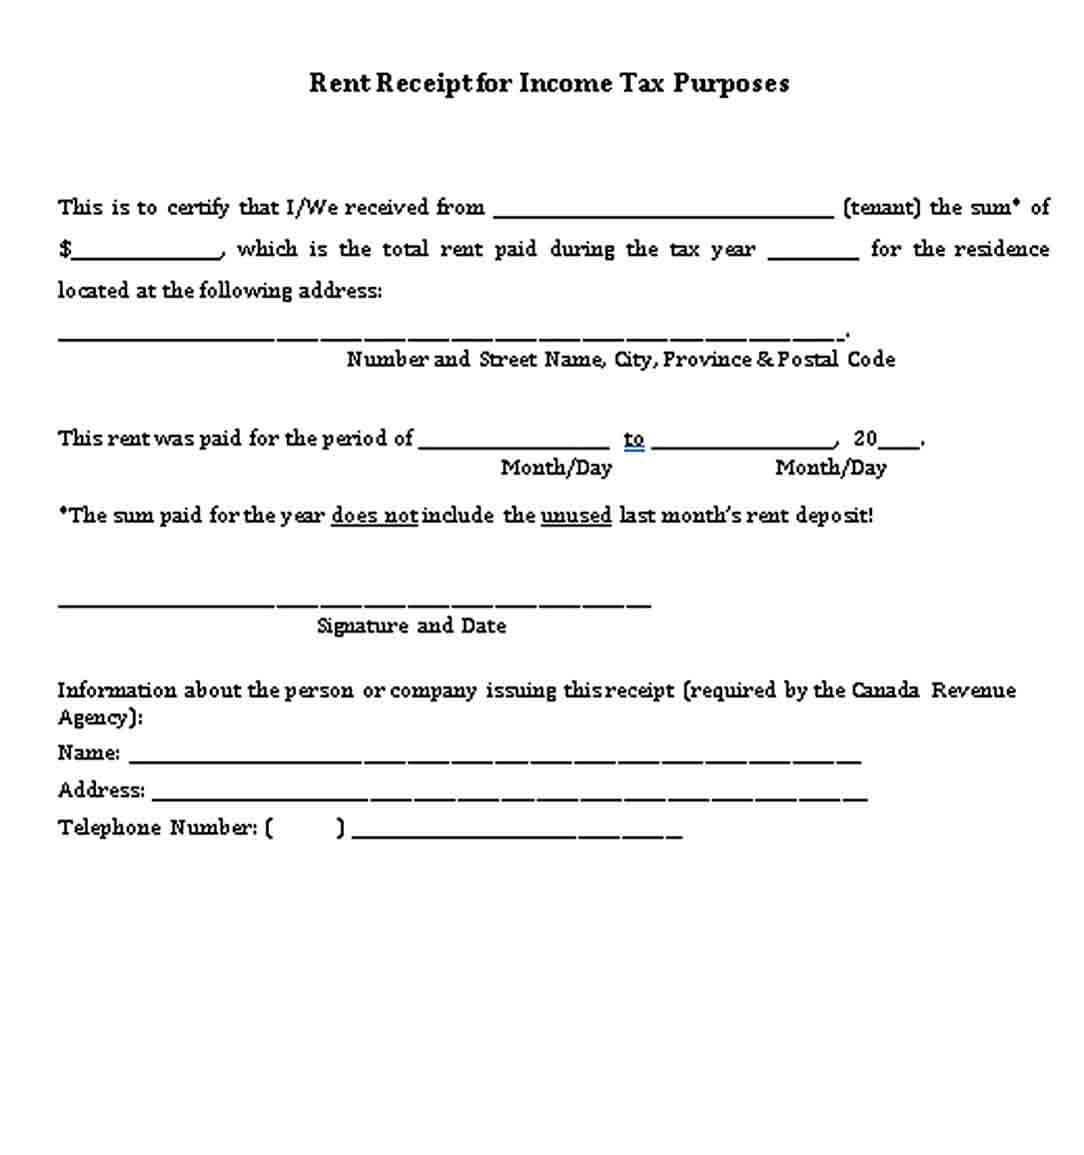 Rent Receipt for Income Tax Purposes Template